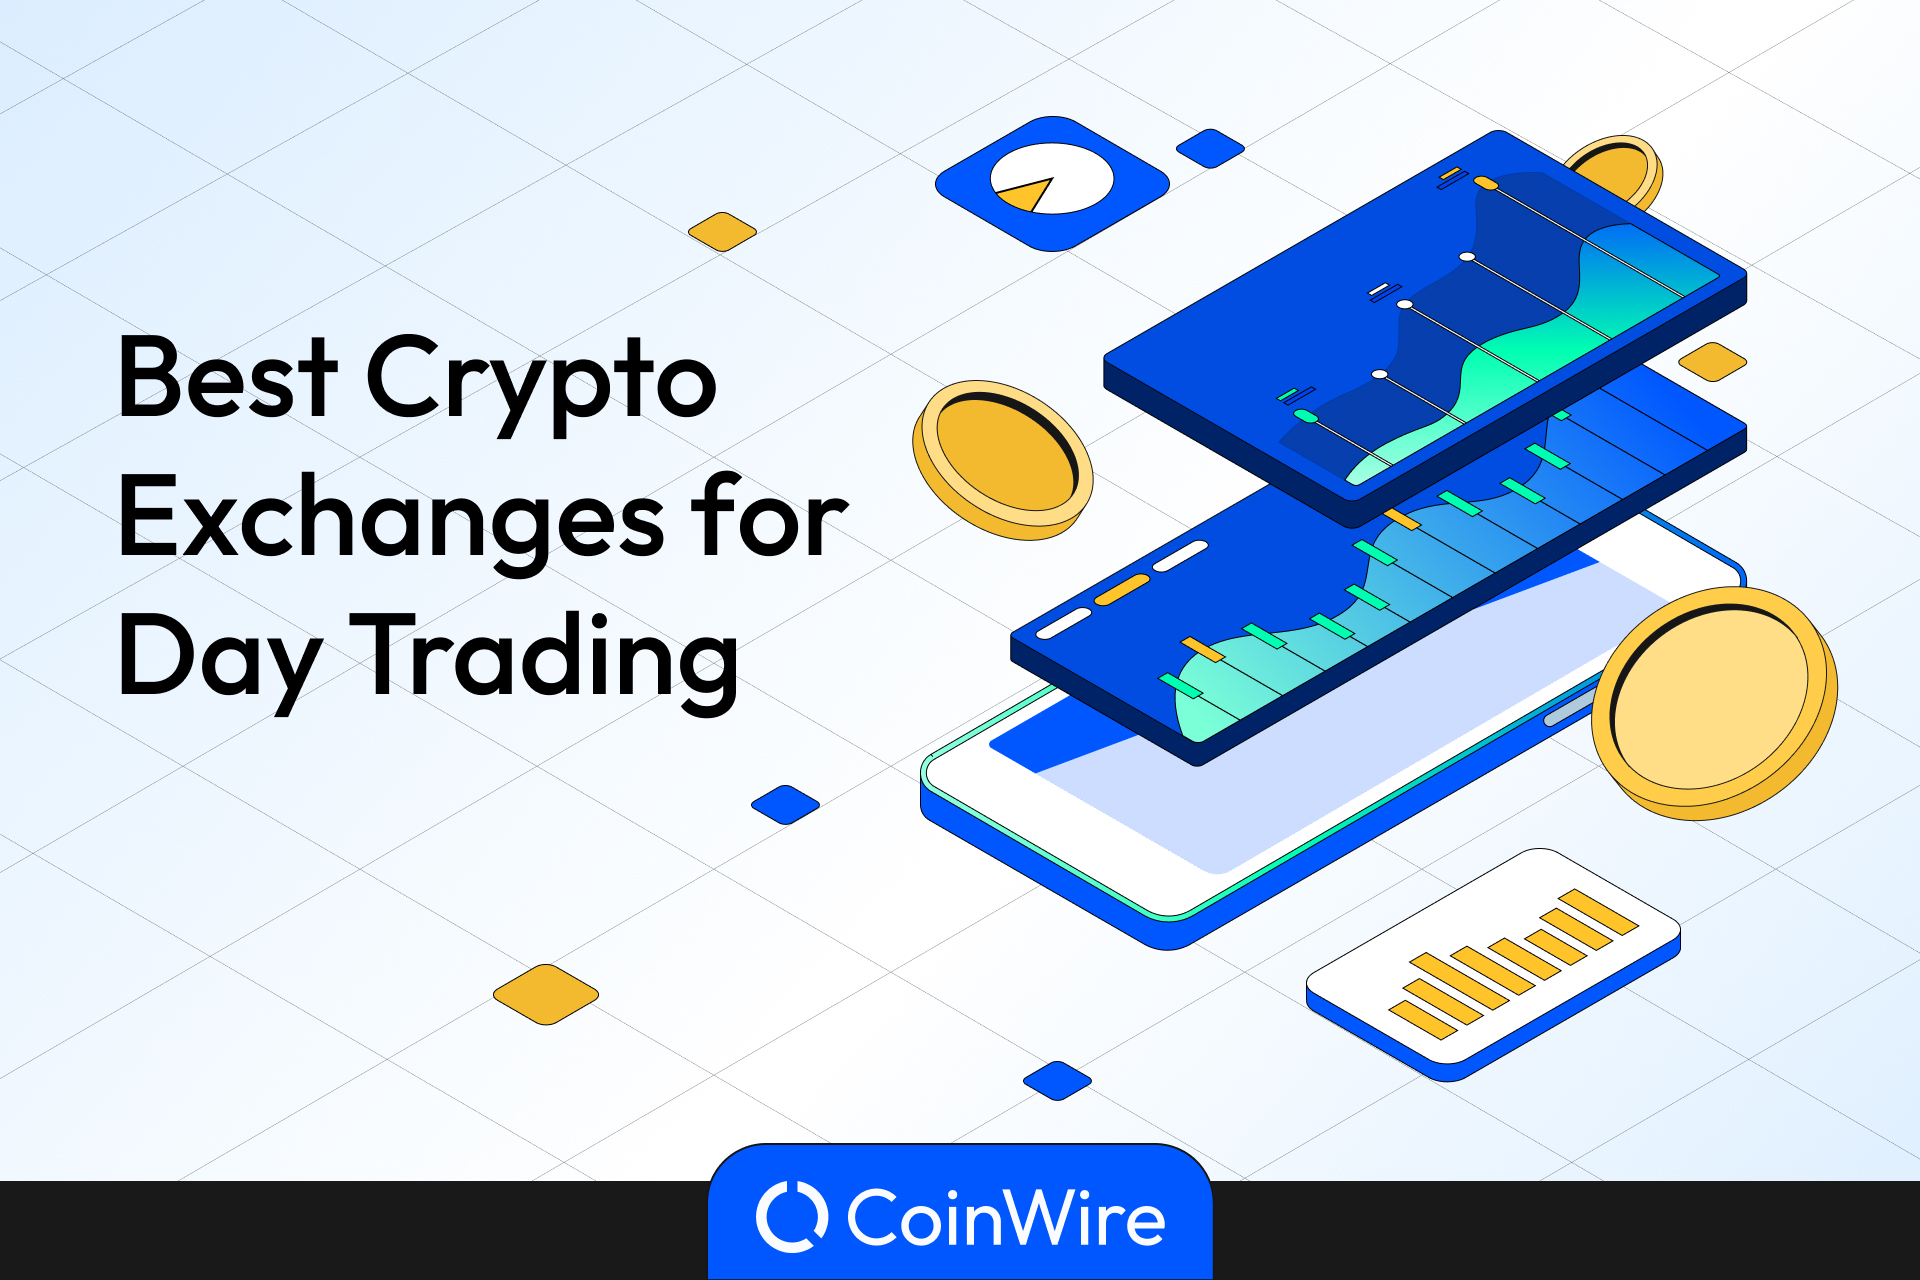 Best Crypto Exchanges For Day Trading